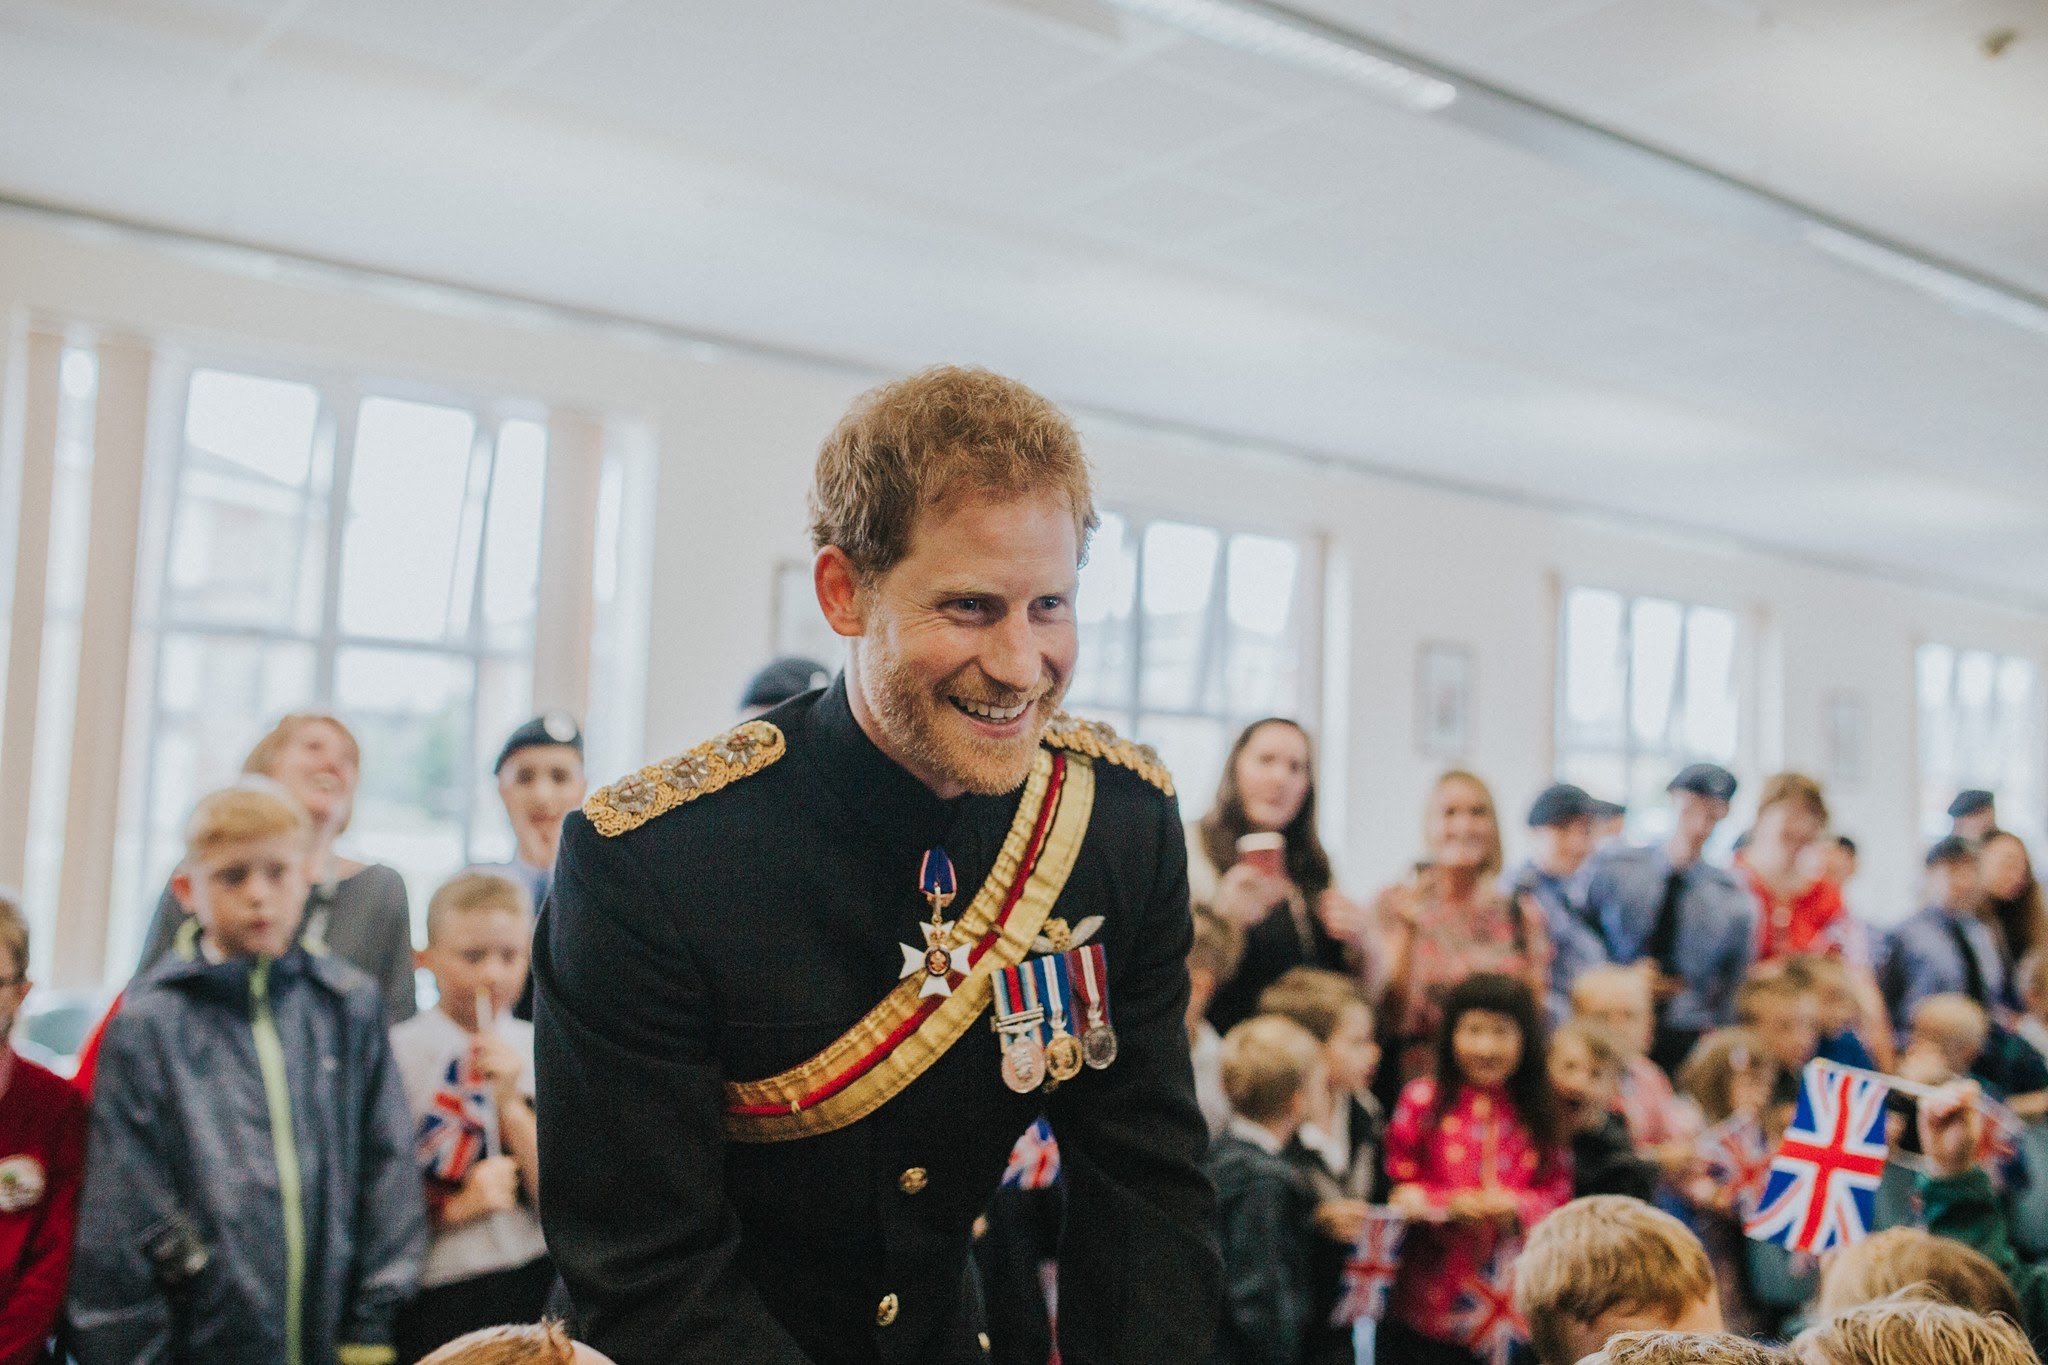  The photo was taken in July 2017 at the presentation of the new Queen's colour for the RAF Regiment, presented by HRH Prince Harry at RAF Honington. Prince Harry was greeting everyone so I managed to get this lovely picture as he was talking to us. 